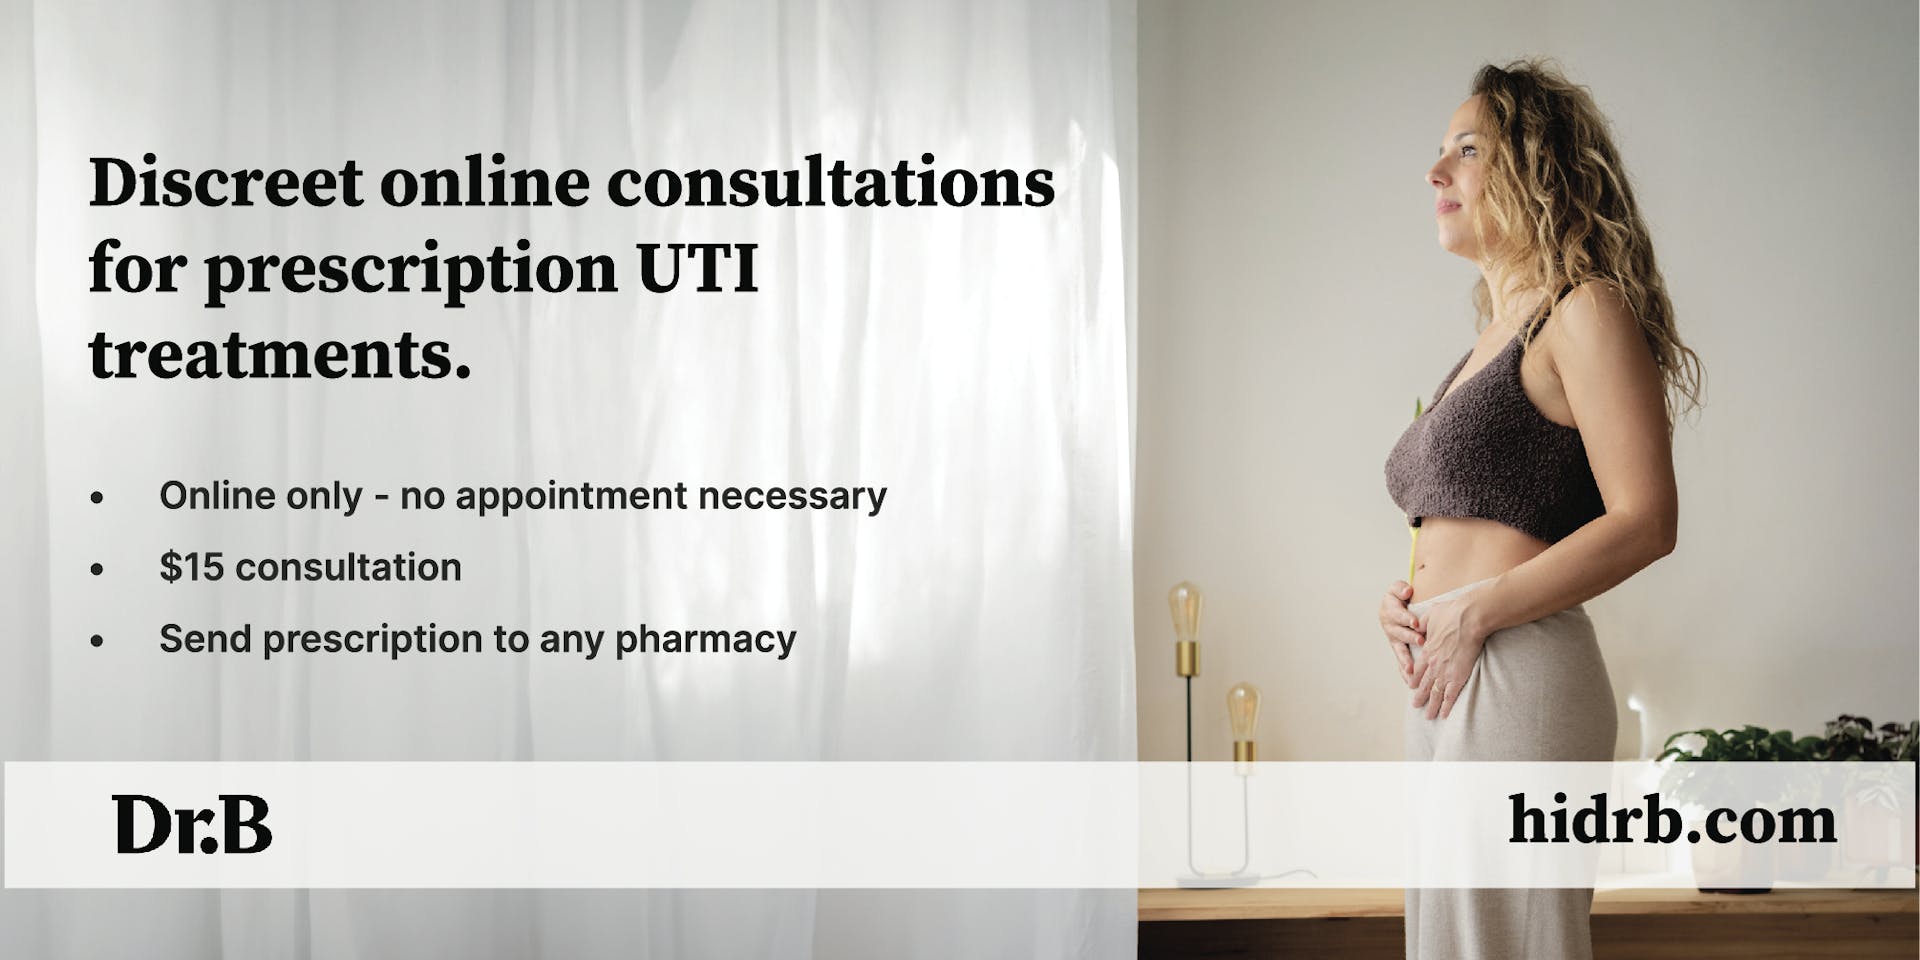 Banner advertising Dr. B's services for UTI treatments